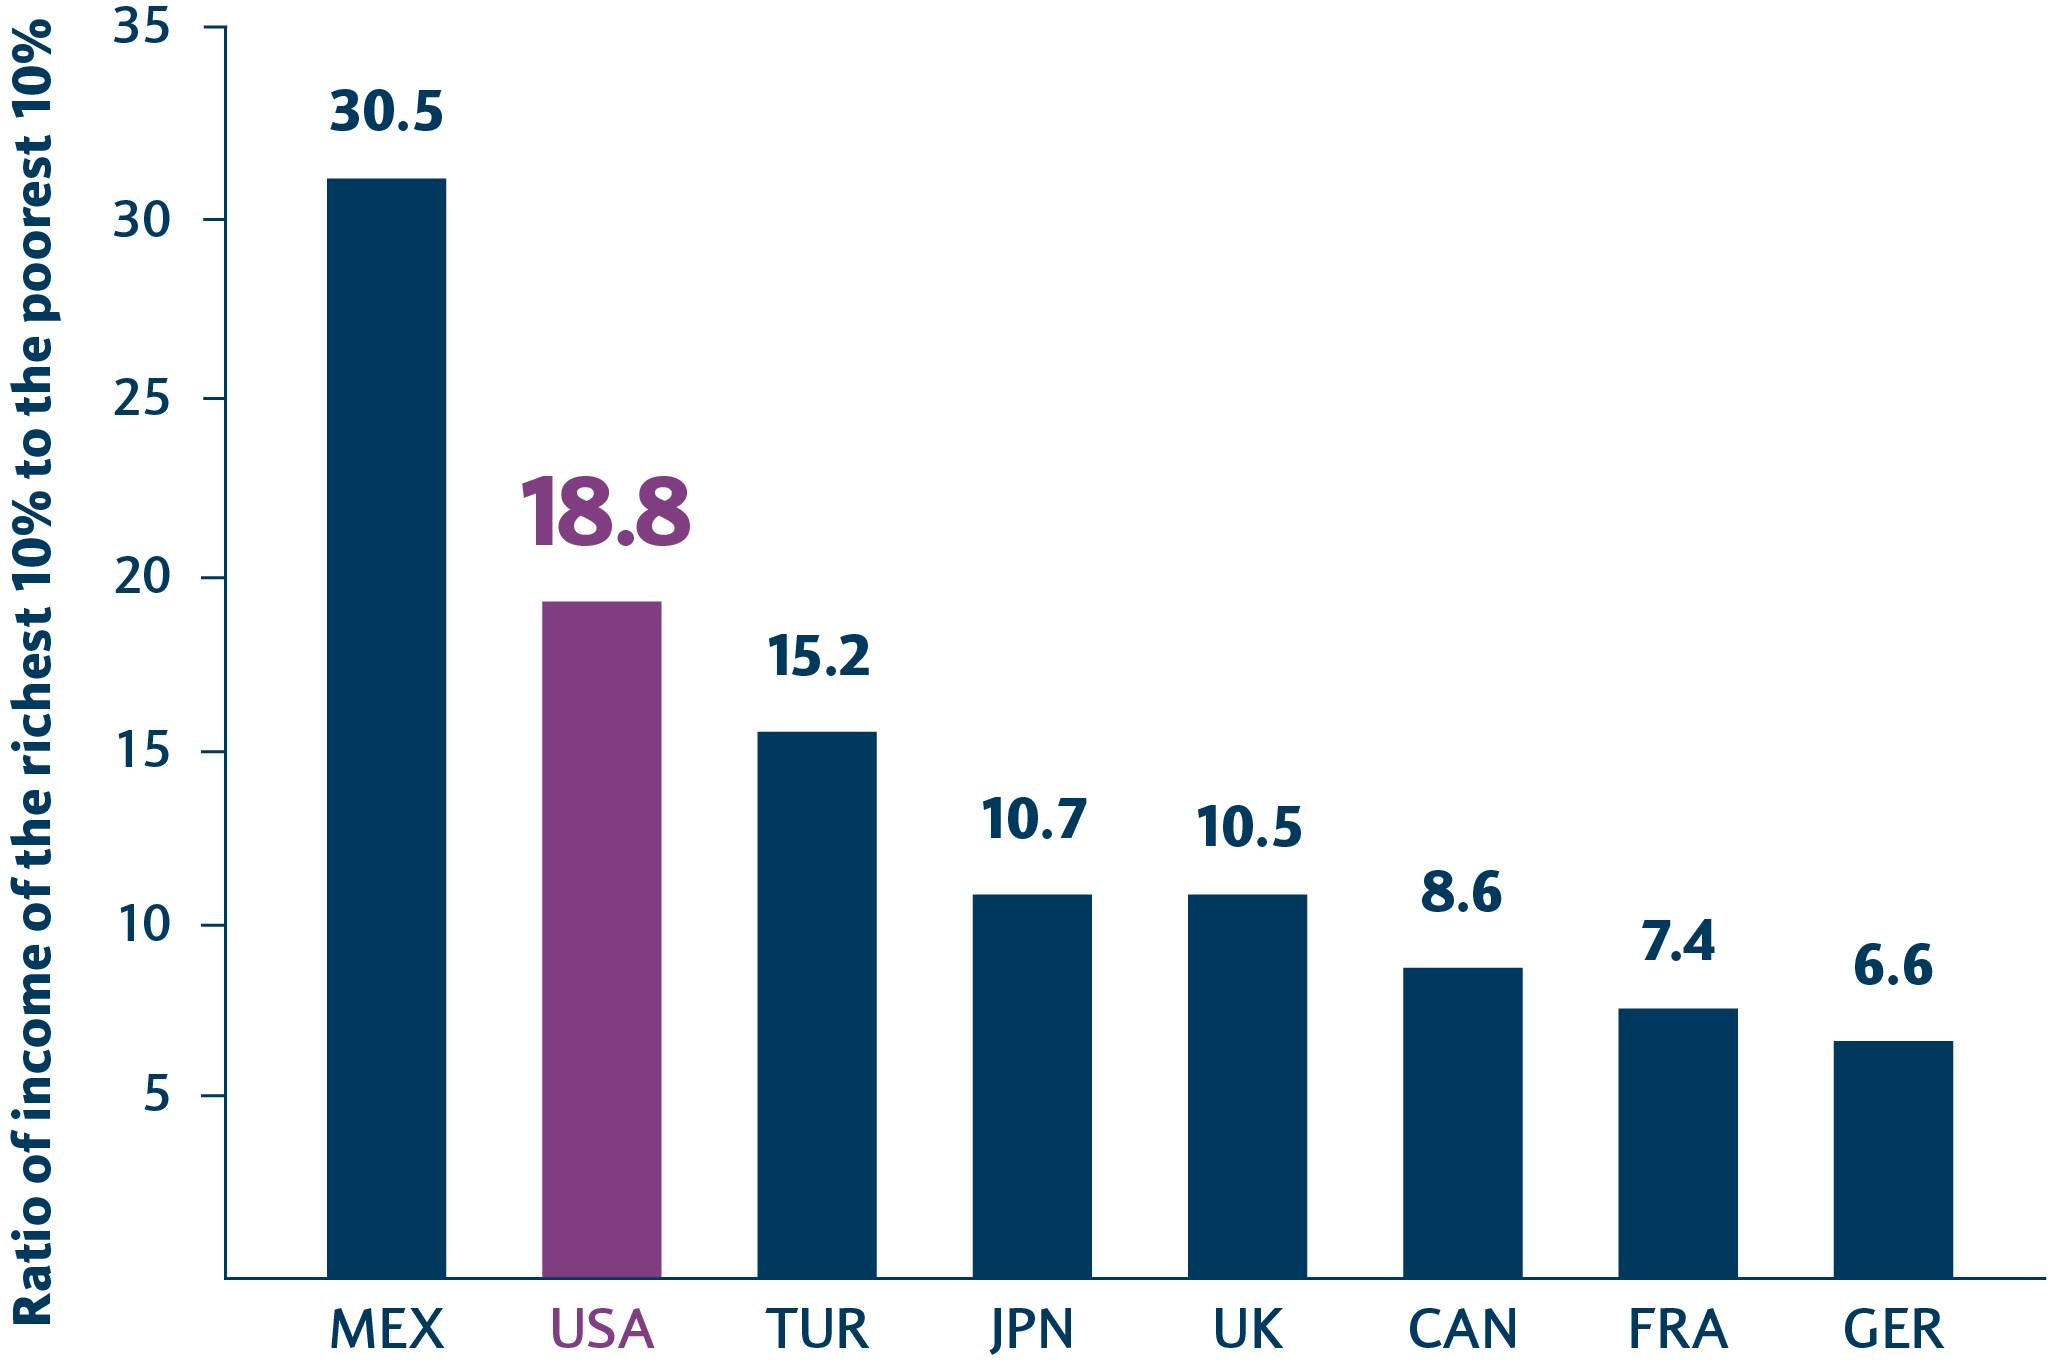 Bar chart showing ratio of income of the richest 10% to the poorest 15% in 8 countries, including the US (ratio 18.8x)